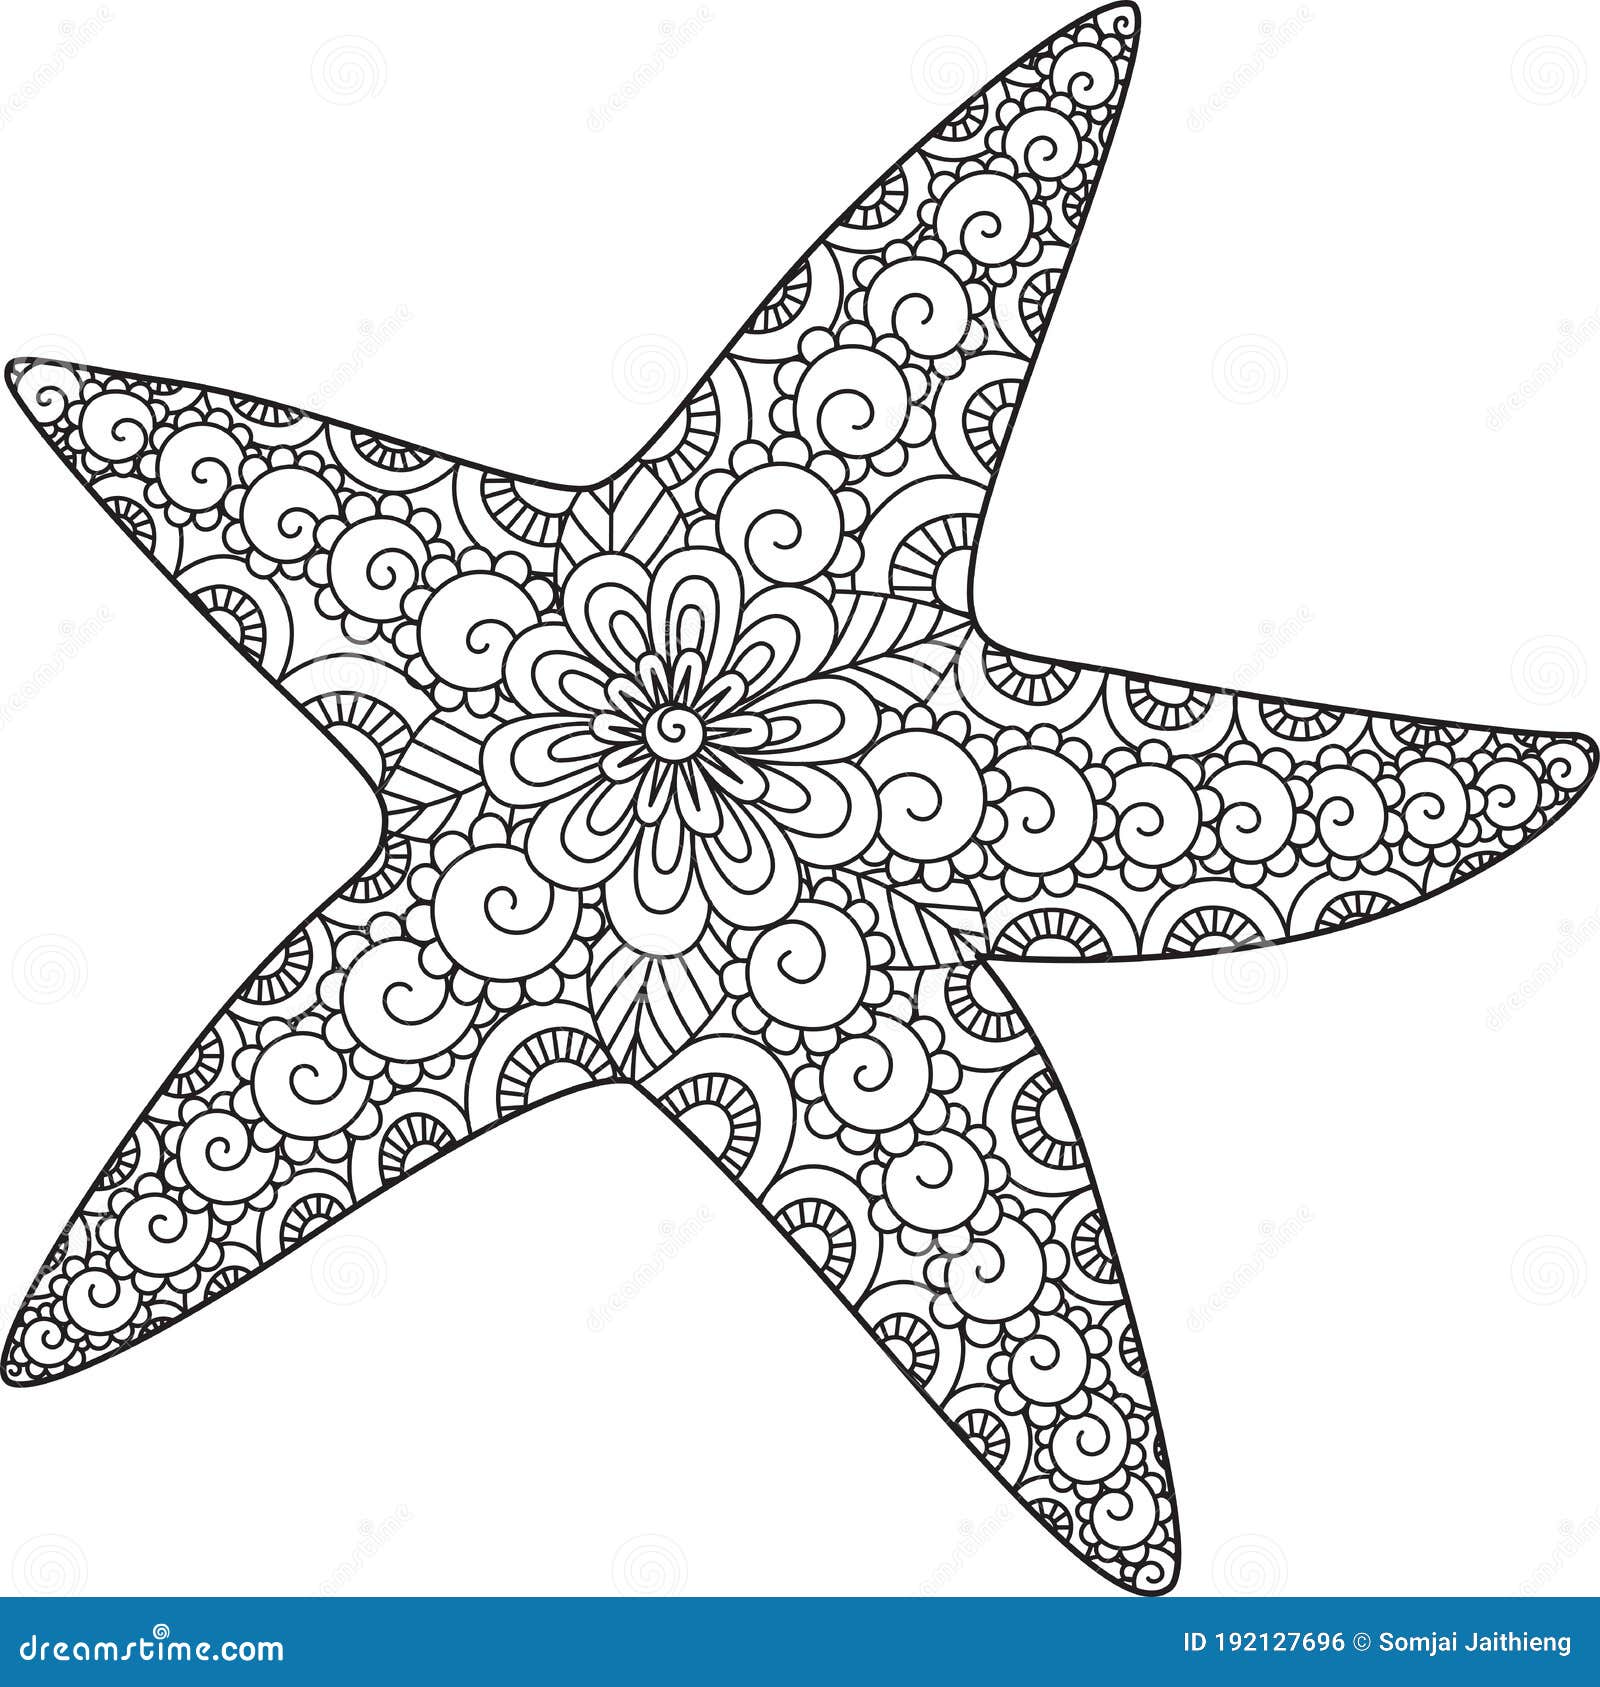 View Coloring Page Of A Starfish Images